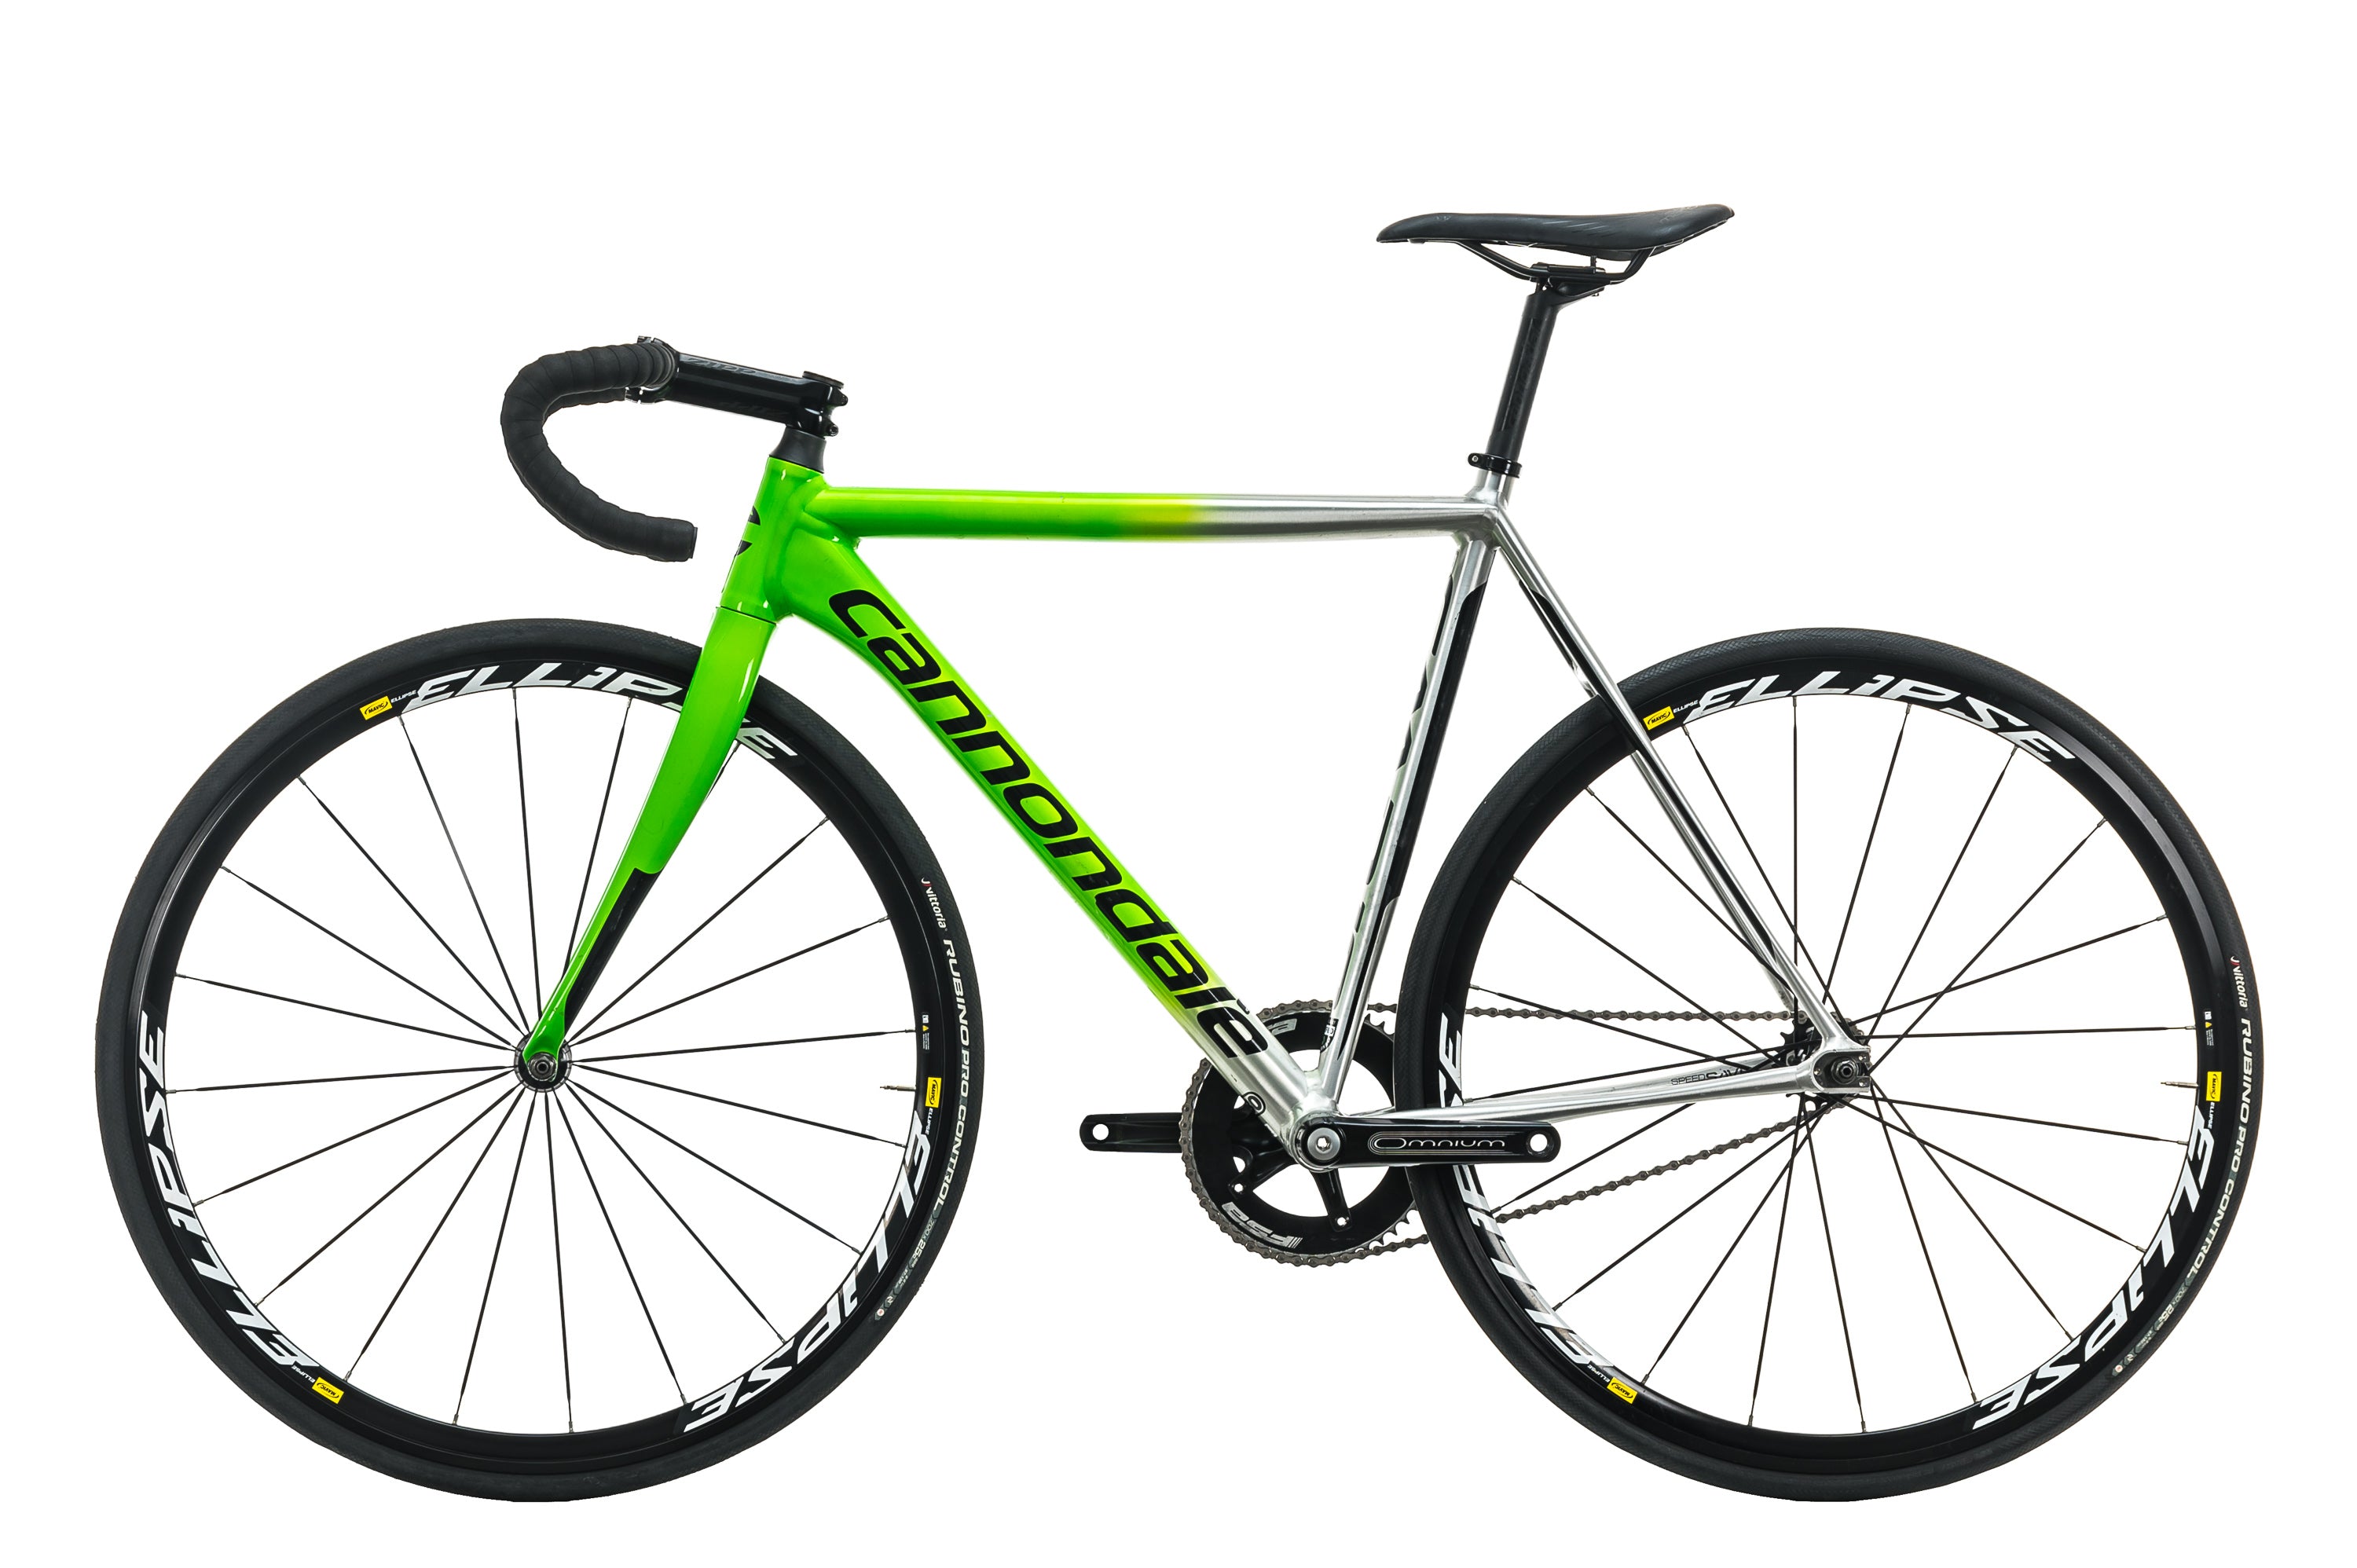 Cannondale CAAD10 TRACK 1 Track Bike - 2017, 52cm | The Pro's